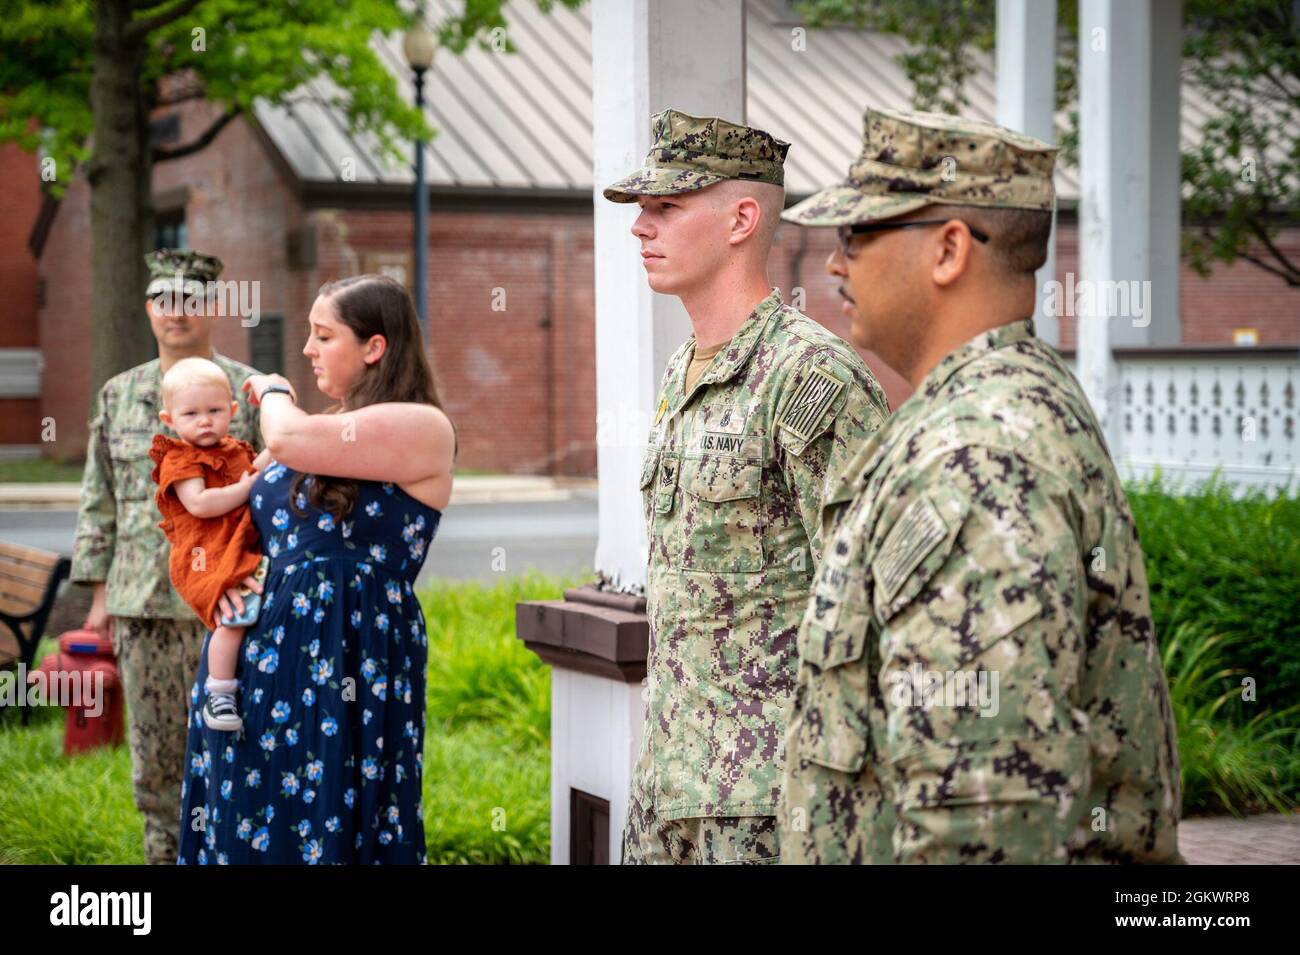 WASHINGTON, DC (July 12, 2021) – Master-at-Arms 2nd Class Tyrell Dugre, center, stands at attention during his reenlistment ceremony, held onboard Washington Navy Yard. Stock Photo